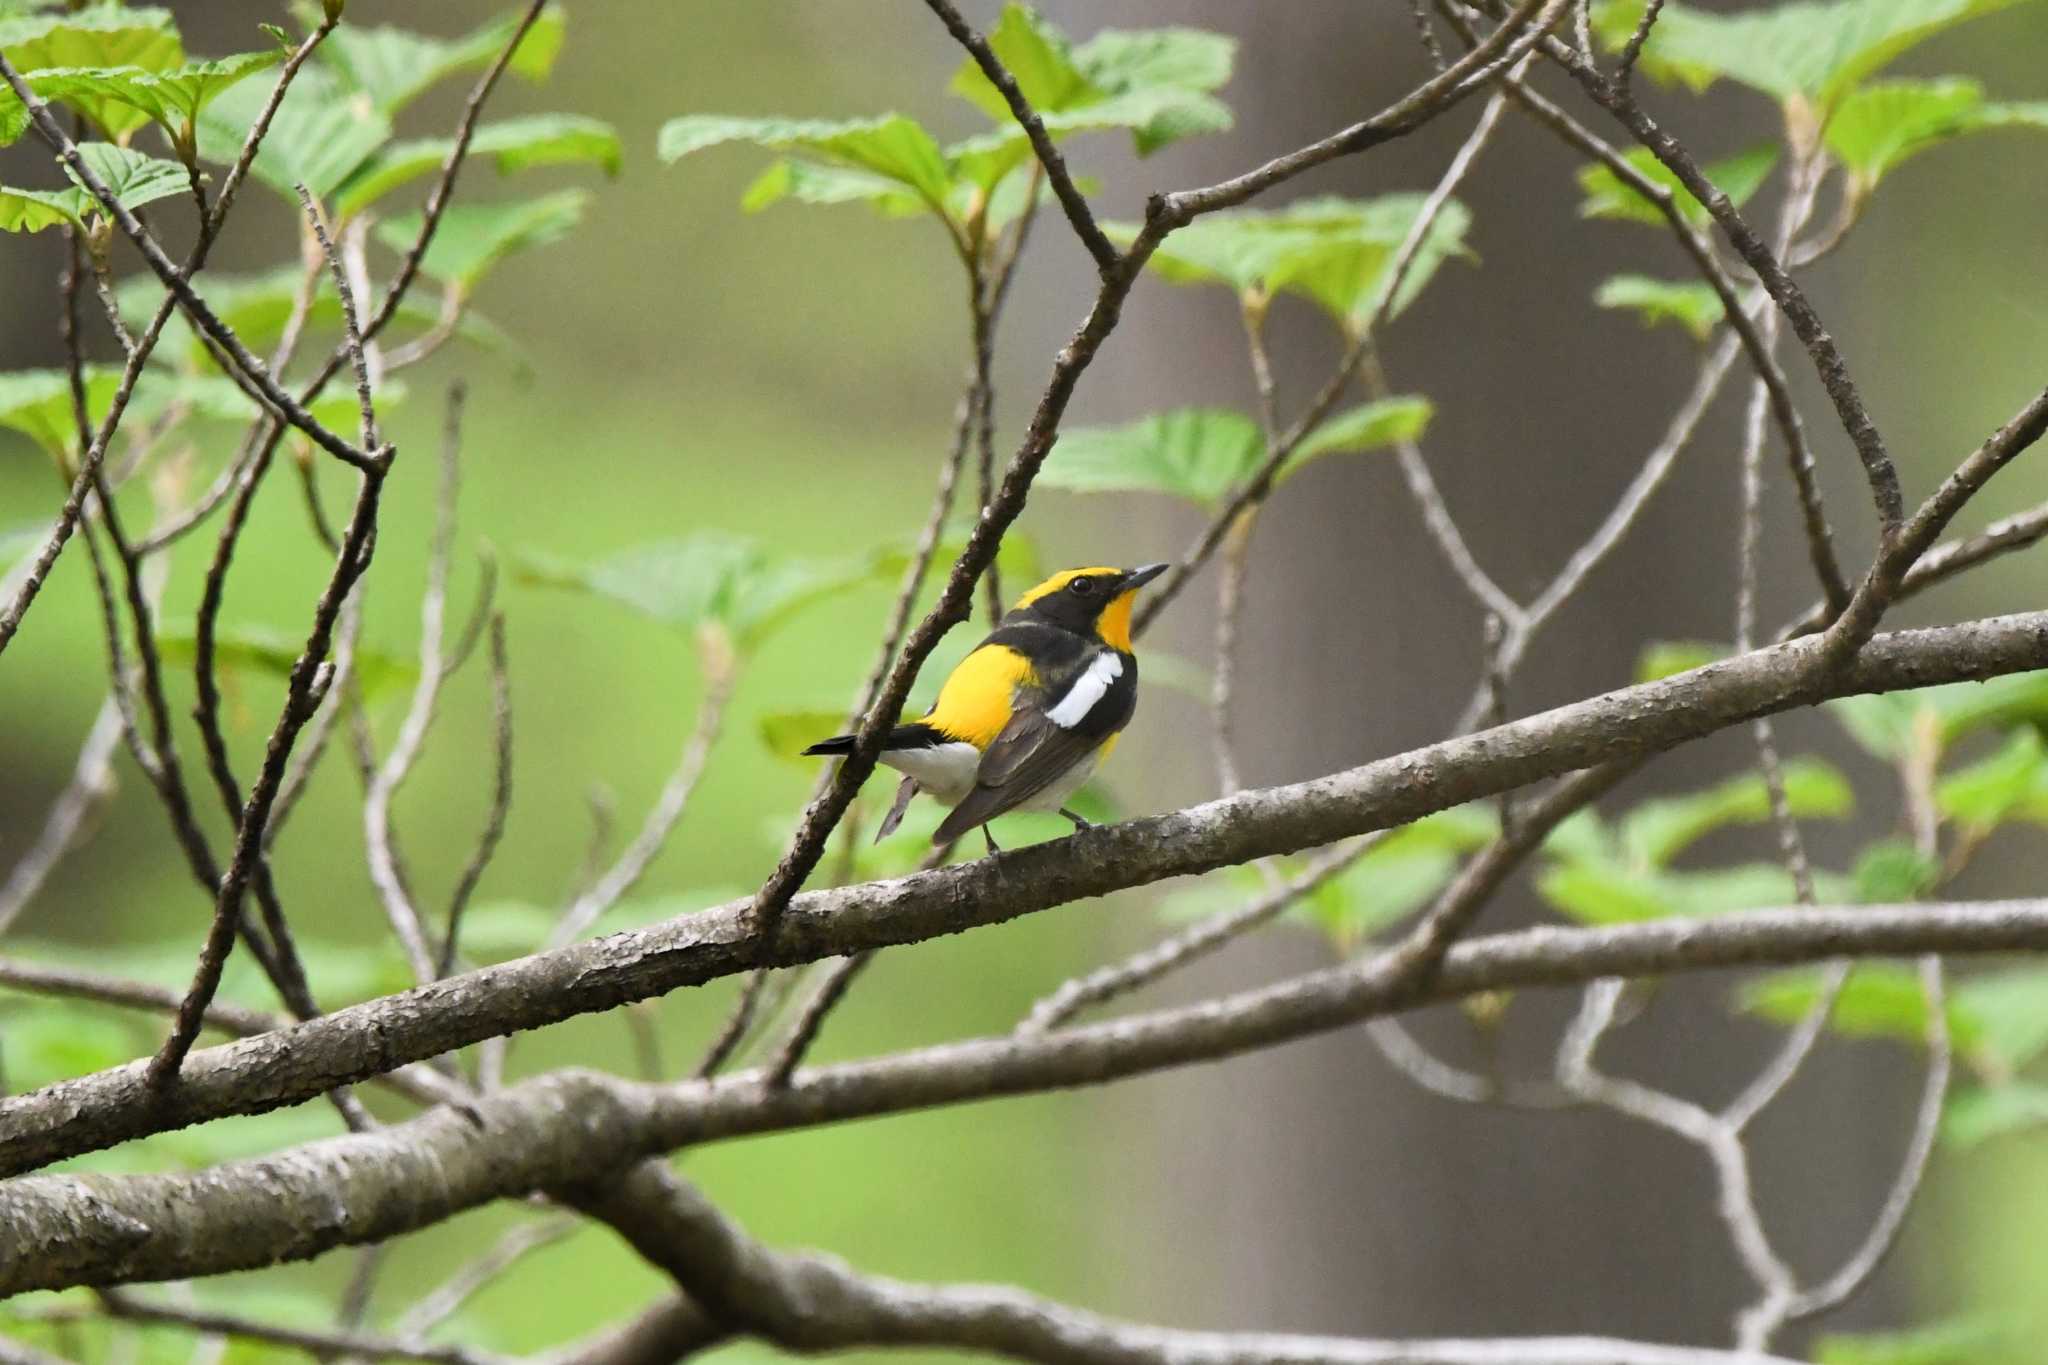 Photo of Narcissus Flycatcher at 栃木県民の森 by すずめのお宿